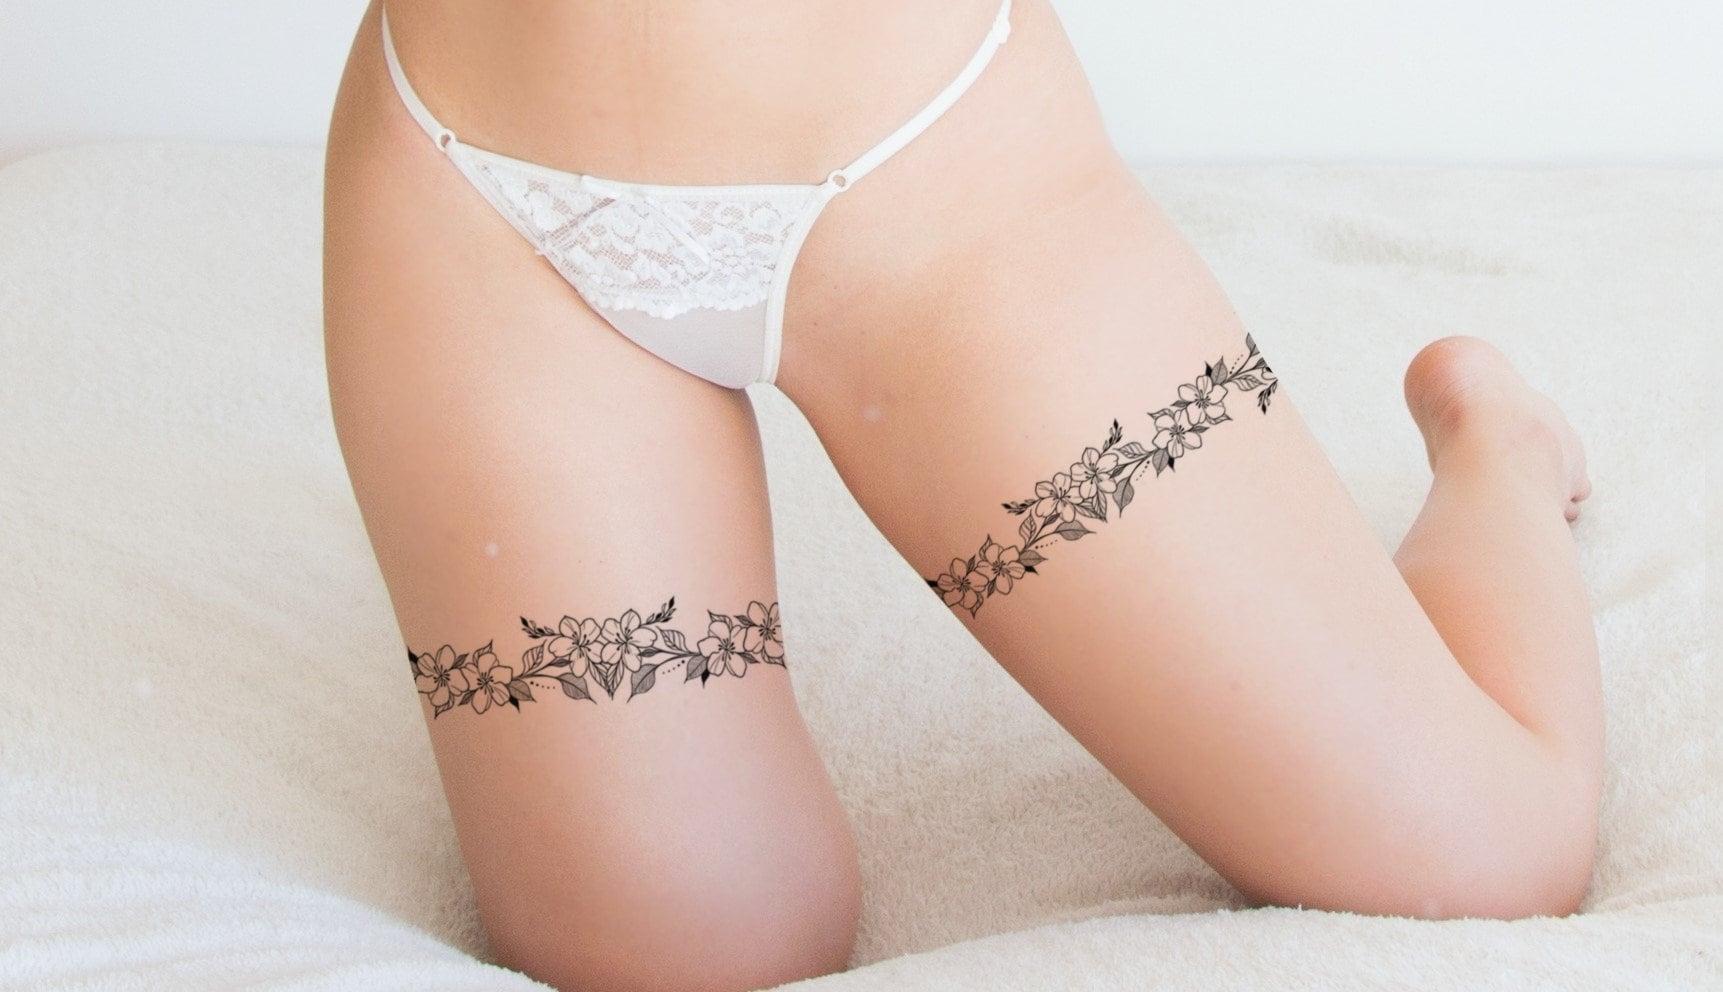 lace garter tattoo design references  Tagged feather tattoo   TattooDesignStock